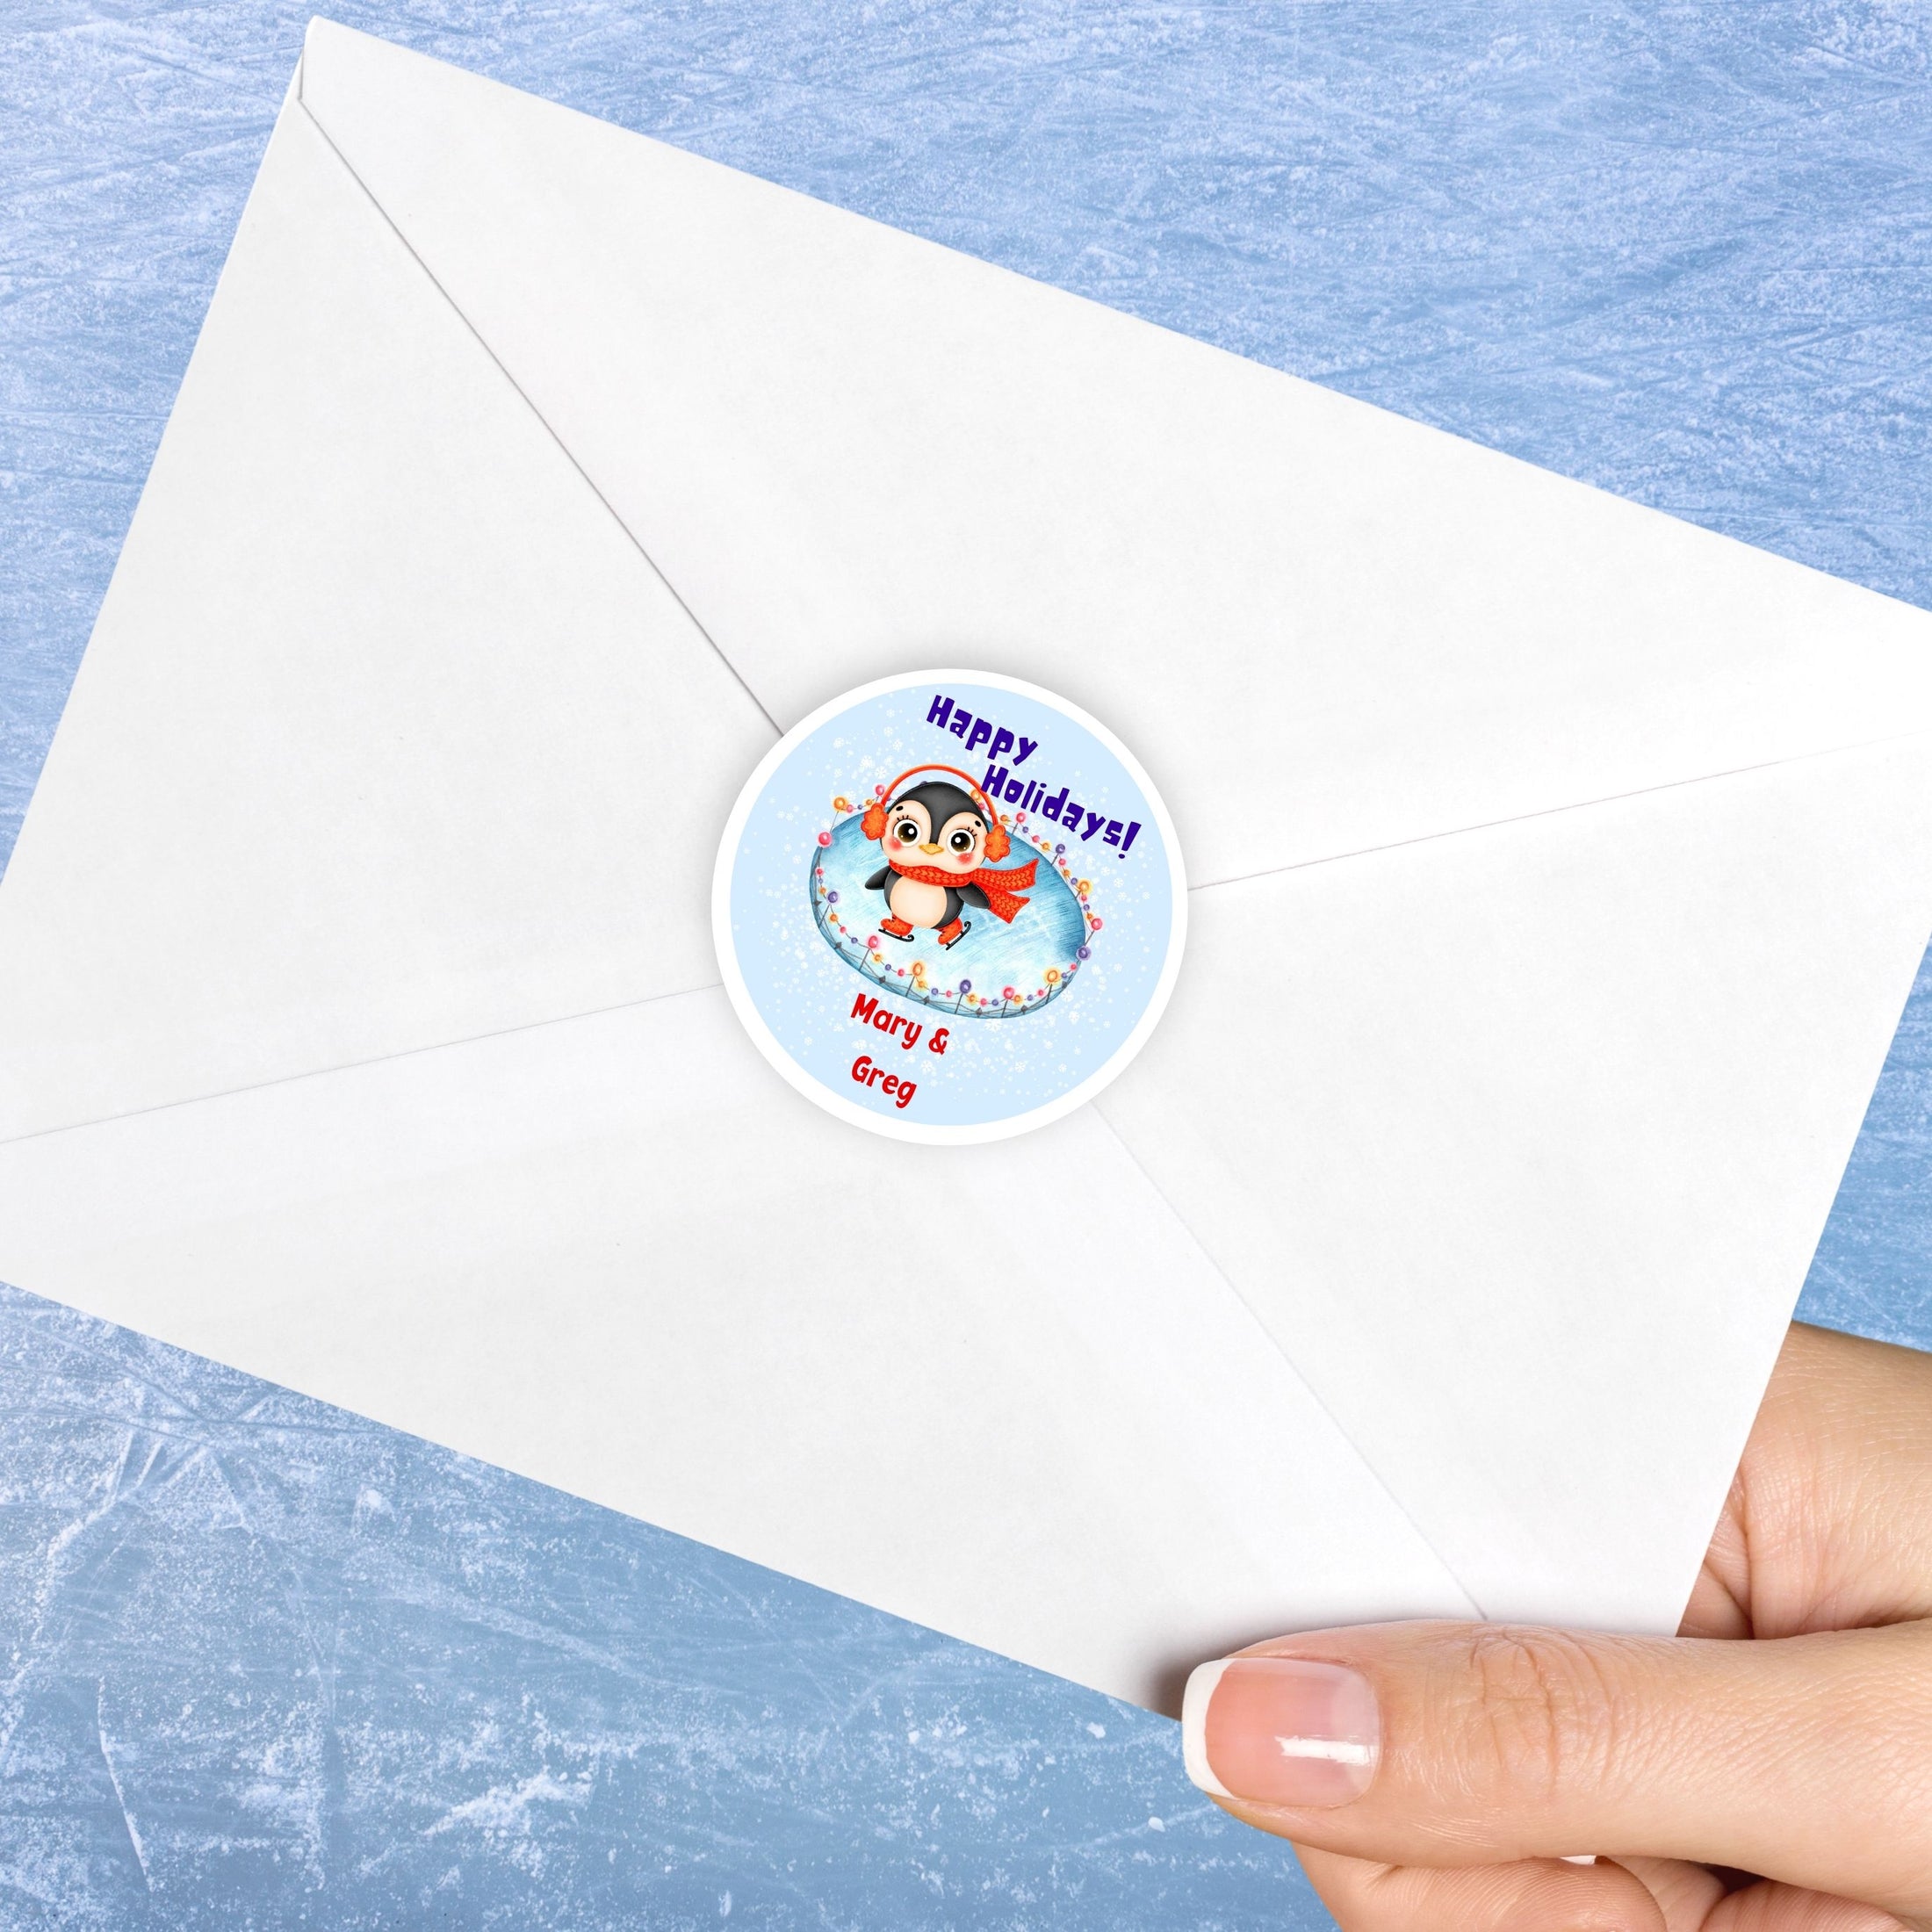 This image shows the personalized holiday sticker on the back of an envelope.